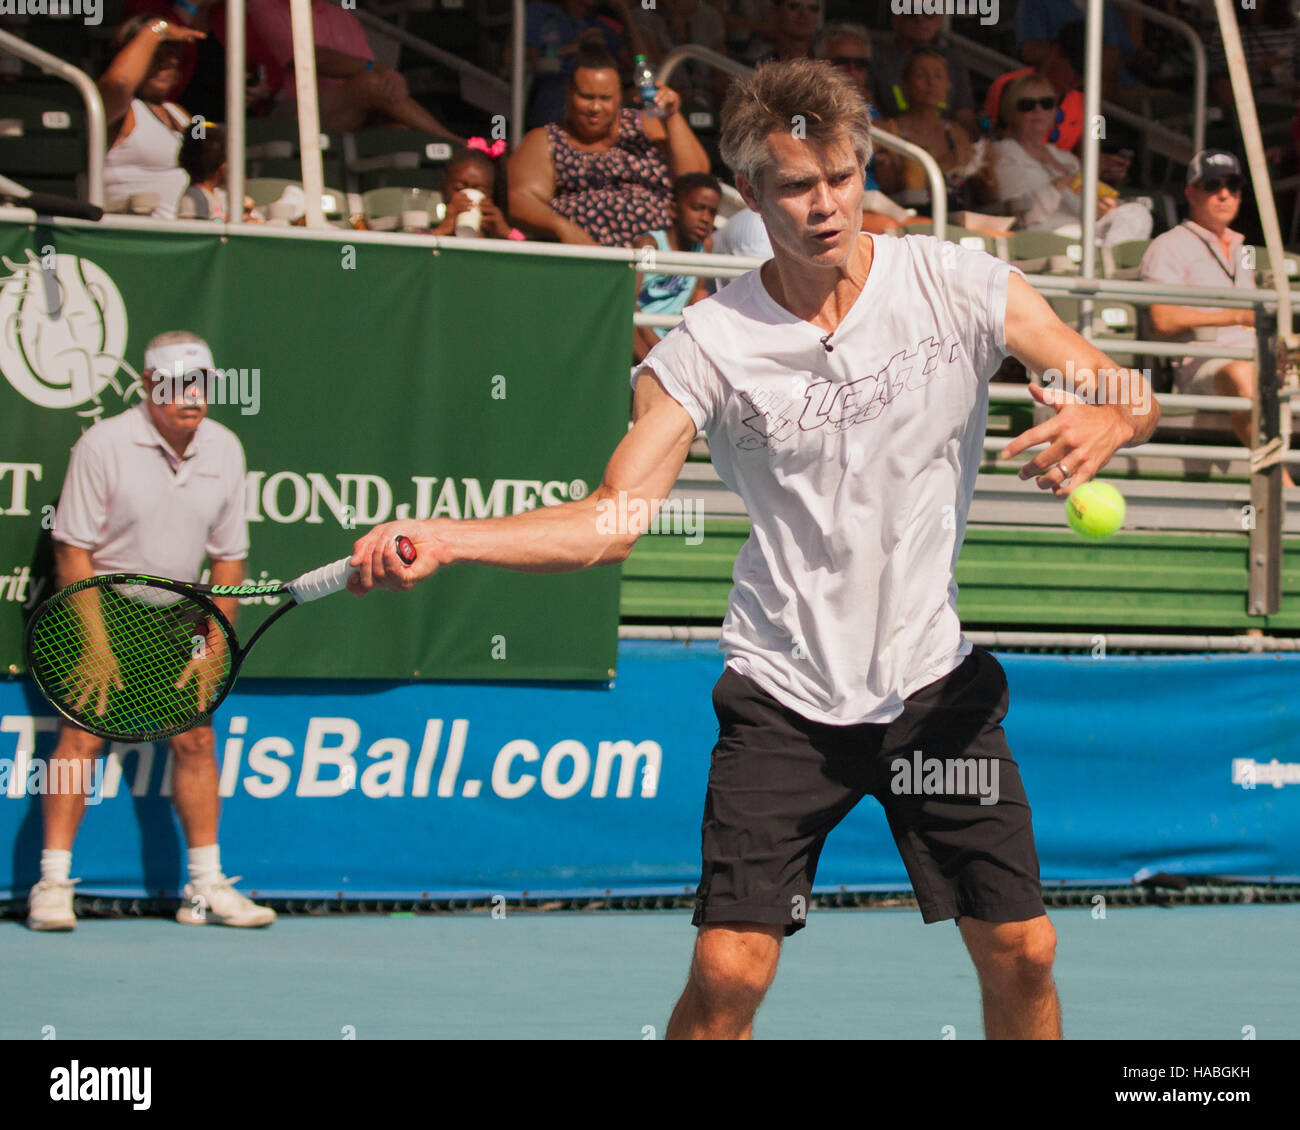 Delray Beach, Florida, USA. 19th Nov, 2016. TIMOTHY OLYPHANT, American actor and producer, in action on court at the 2016 Chris Evert/Raymond James Pro-Celebrity Tennis Classic at Delray Beach Stadium & Tennis Center. Chris Evert Charities has raised more than $22 million in an ongoing campaign for Florida's most at-risk children. © Arnold Drapkin/ZUMA Wire/Alamy Live News Stock Photo